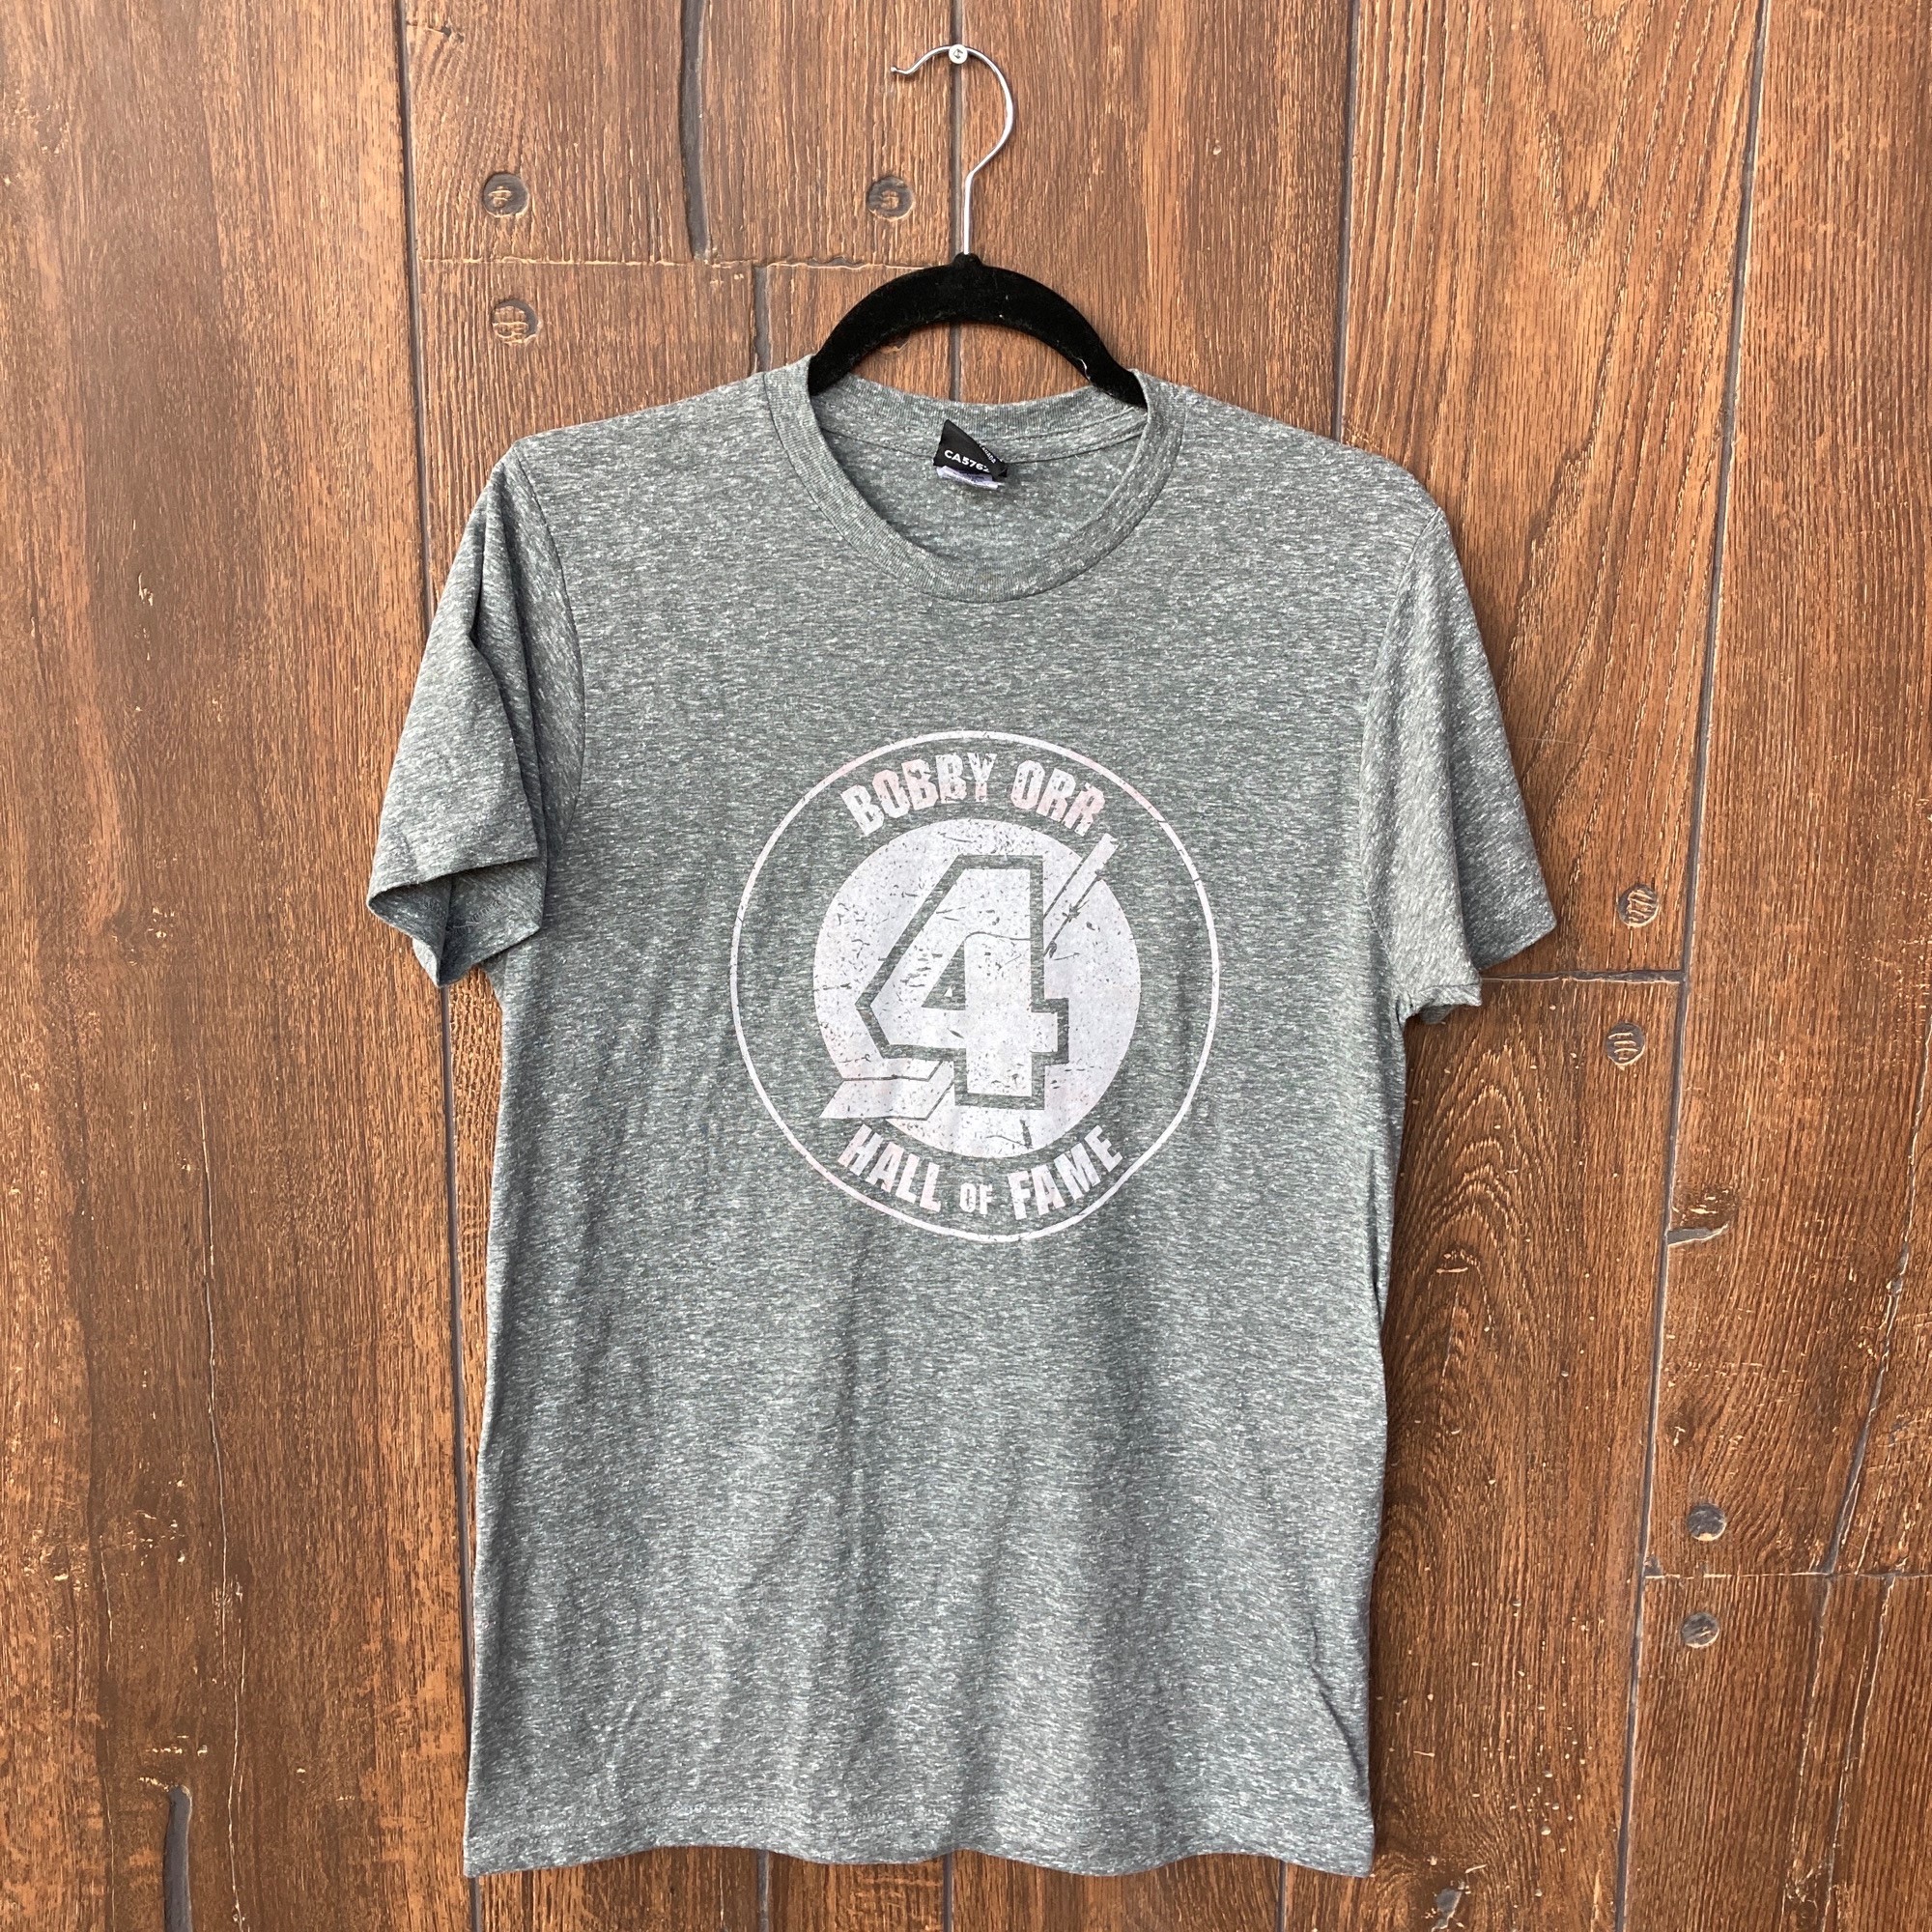 Heather Grey Distressed Logo T-shirt > Bobby Orr Hall of Fame